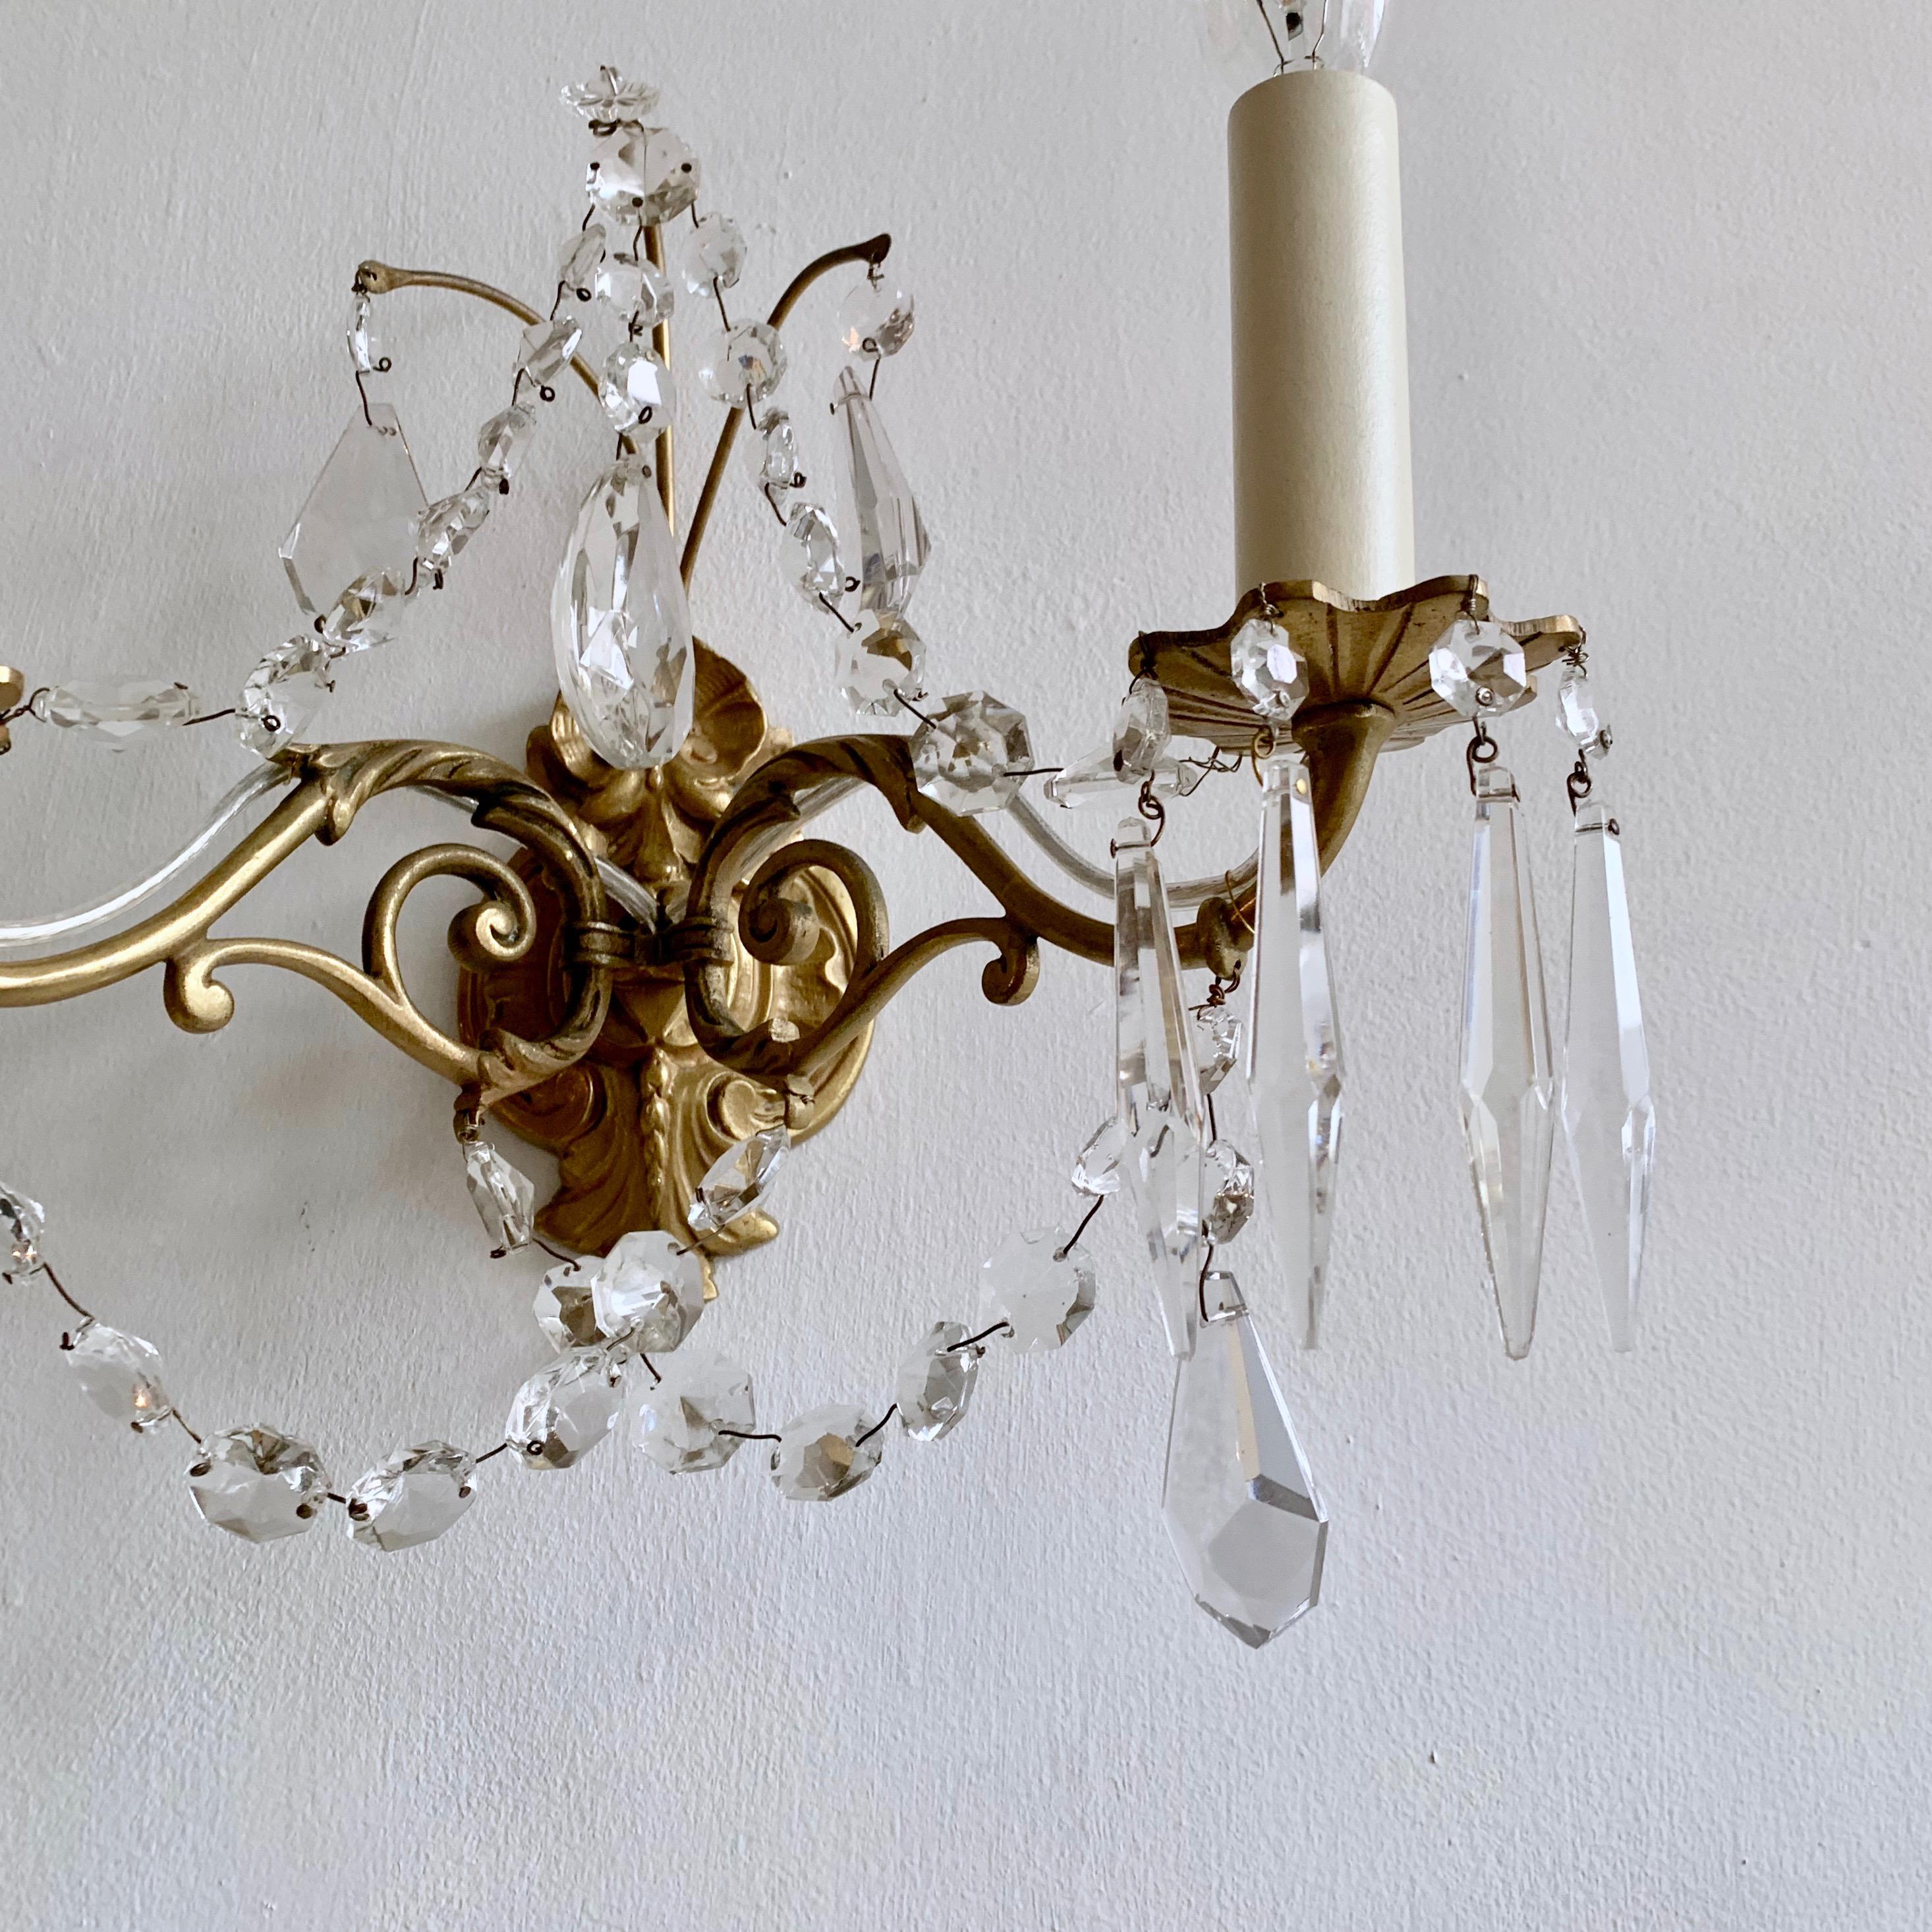 Early 20th Century Pair of French Gilded Ornate Lamp Brass Wall Lights with Crystal Swag Drops